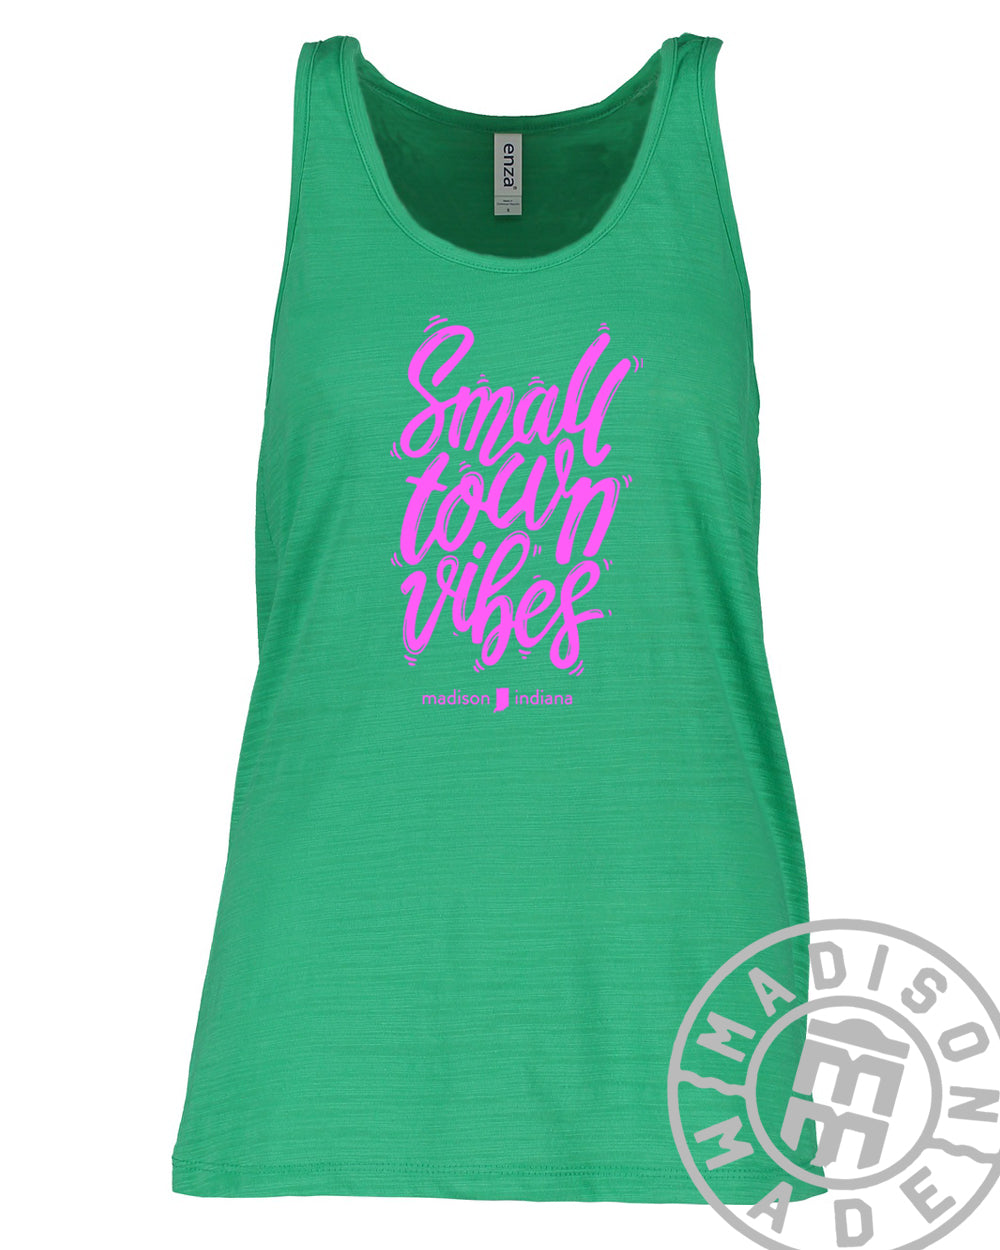 Small Town Vibes Women's Tank